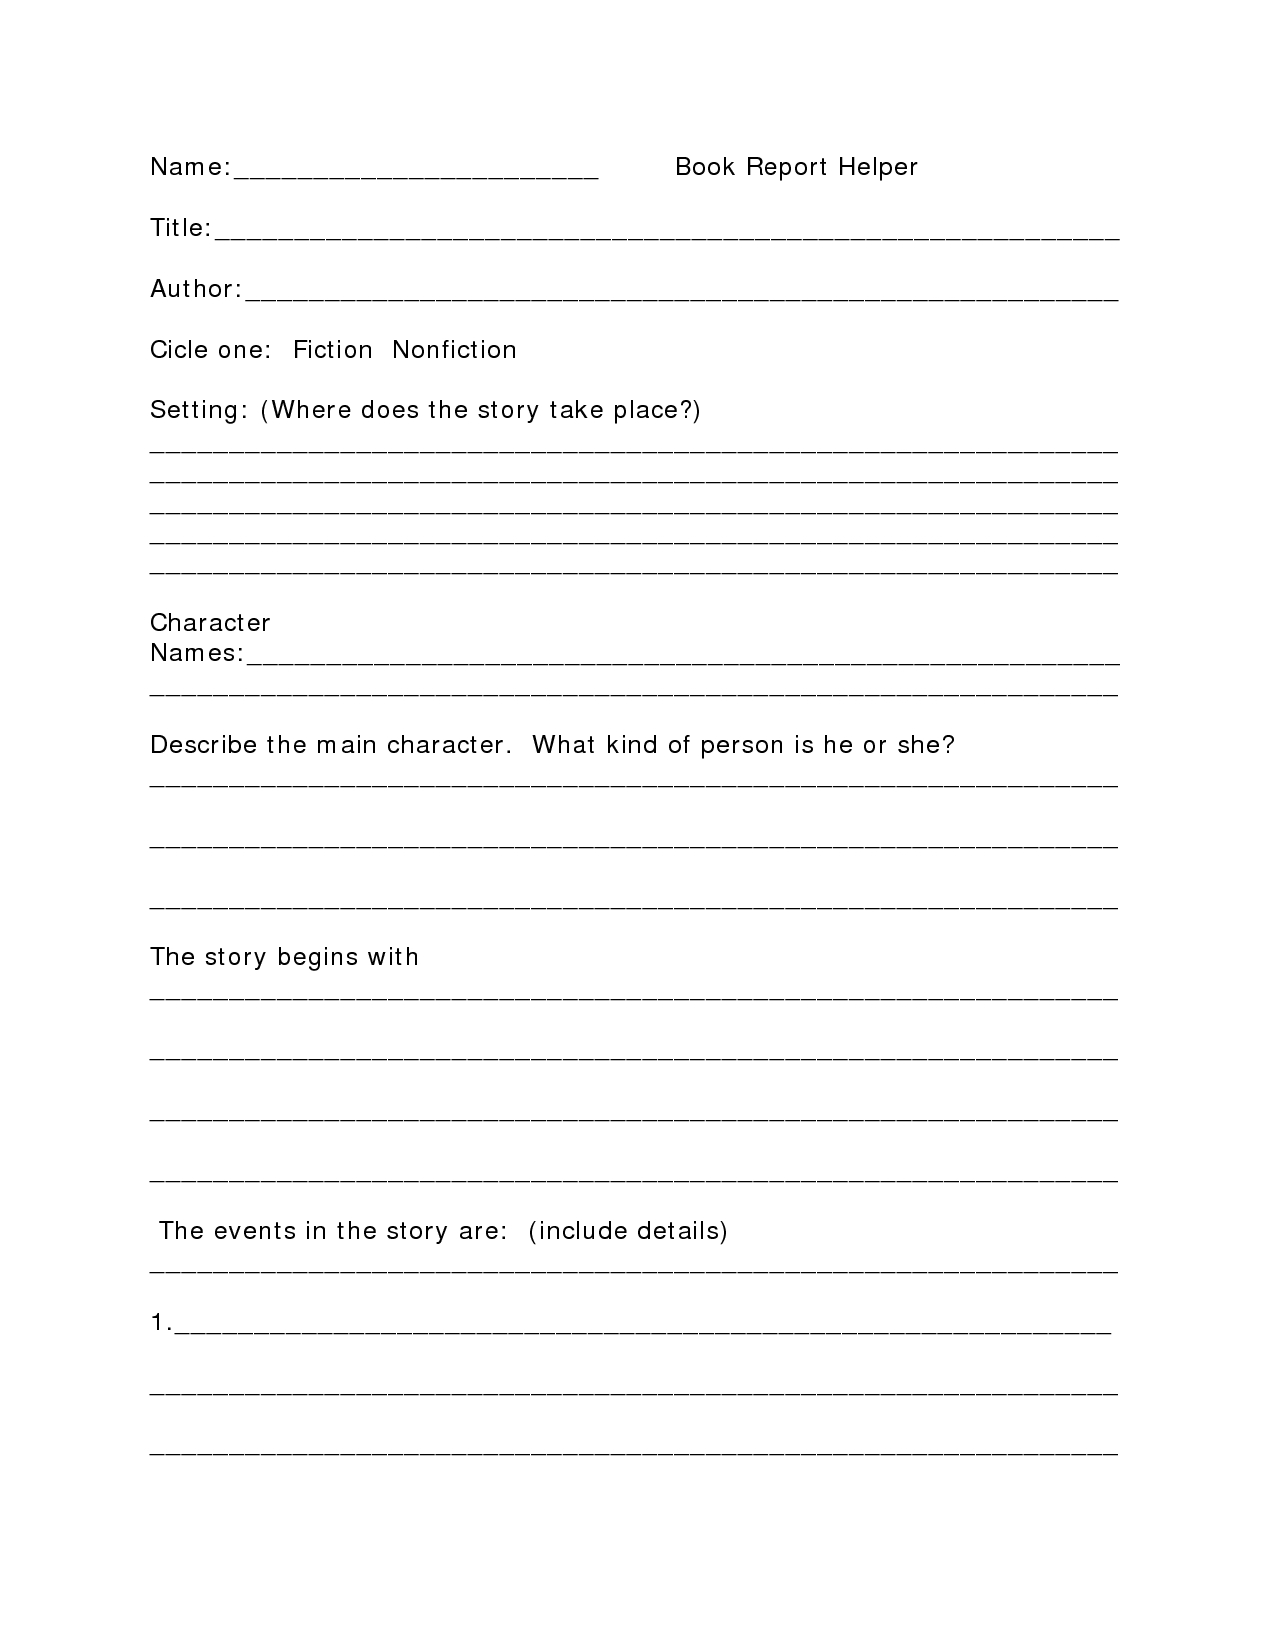 School Book Report Template – Teplates For Every Day Pertaining To High School Book Report Template